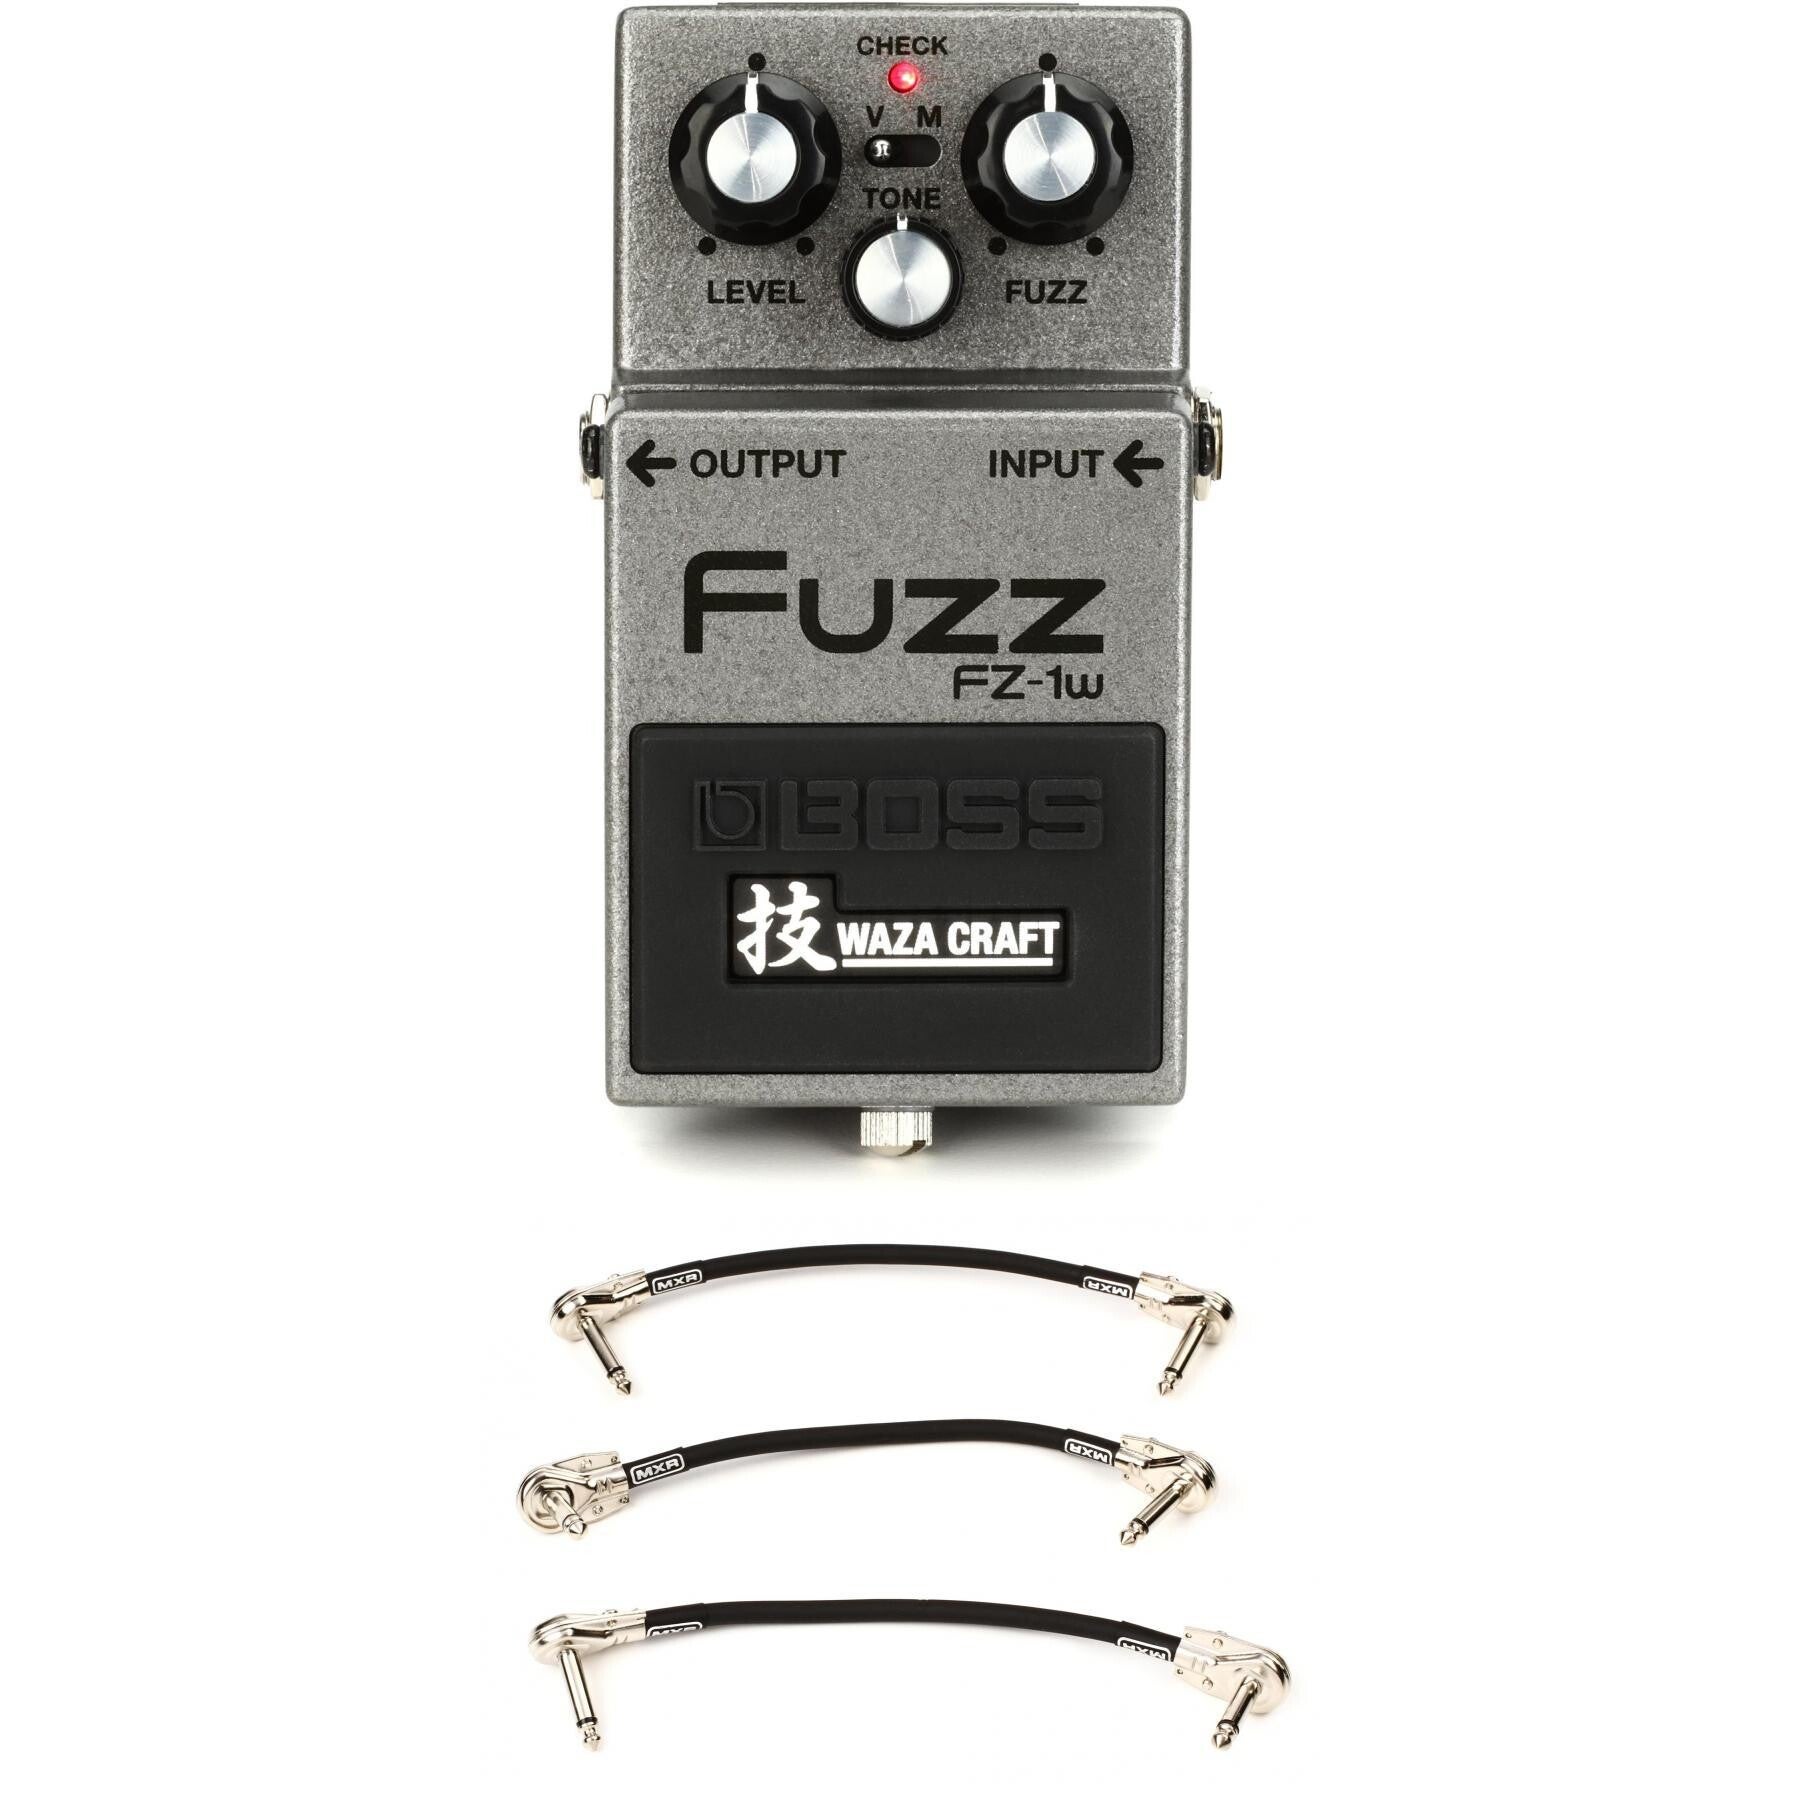 Boss FZ-1W Waza Craft Fuzz Pedal with 3 Patch Cables